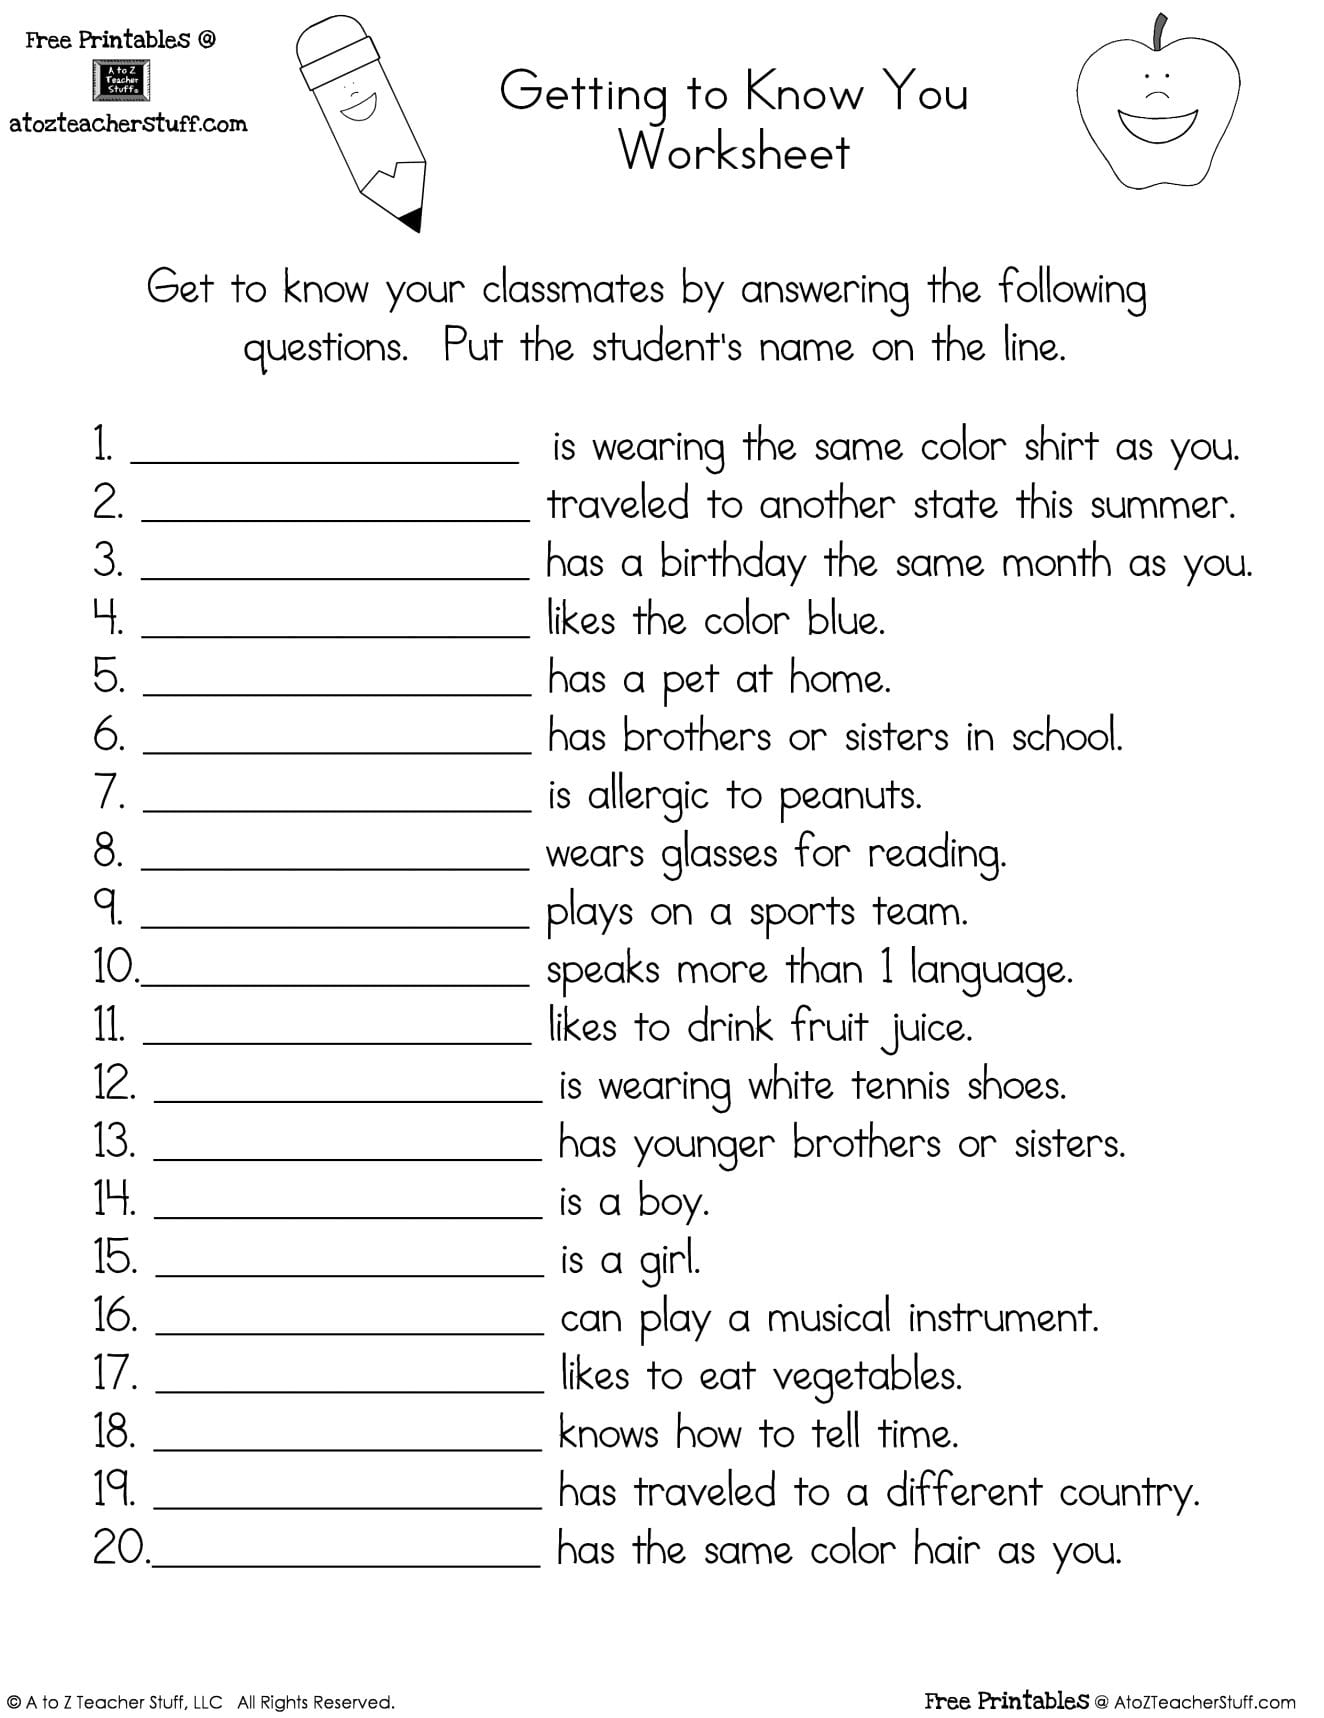 Getting To Know You Worksheet  A To Z Teacher Stuff